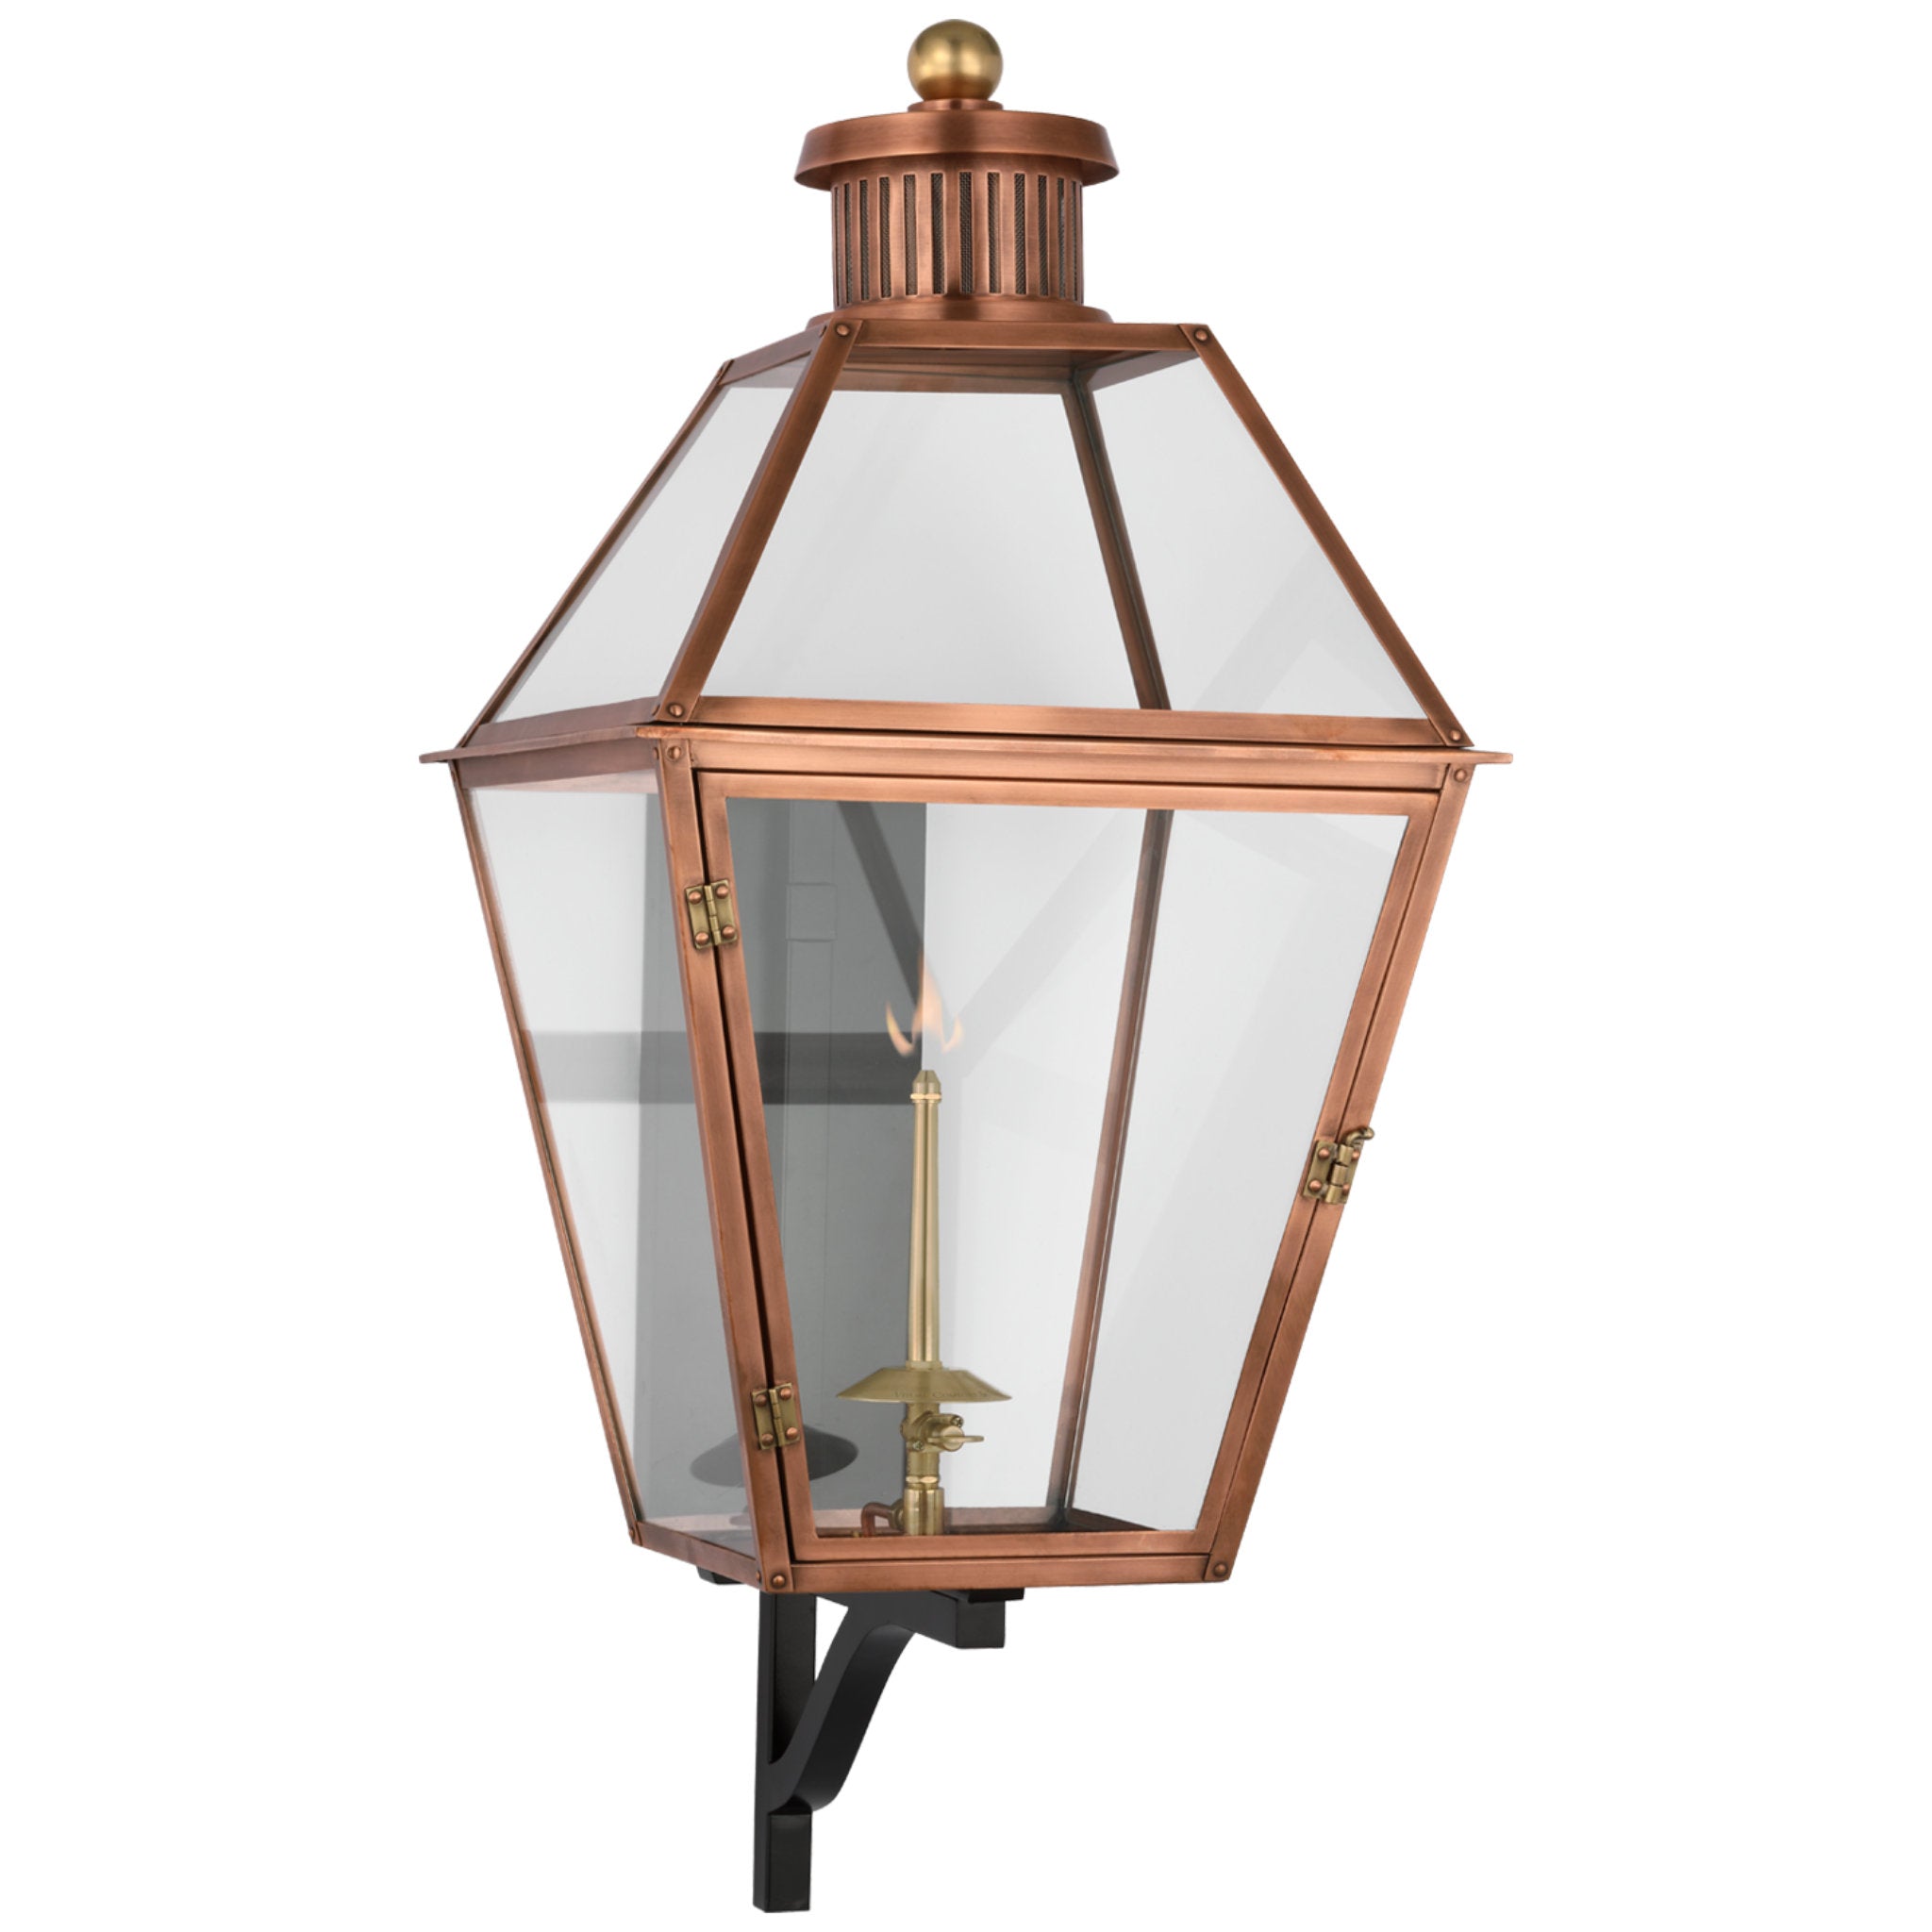 Chapman & Myers Stratford Large Bracketed Gas Wall Lantern in Soft Copper with Clear Glass